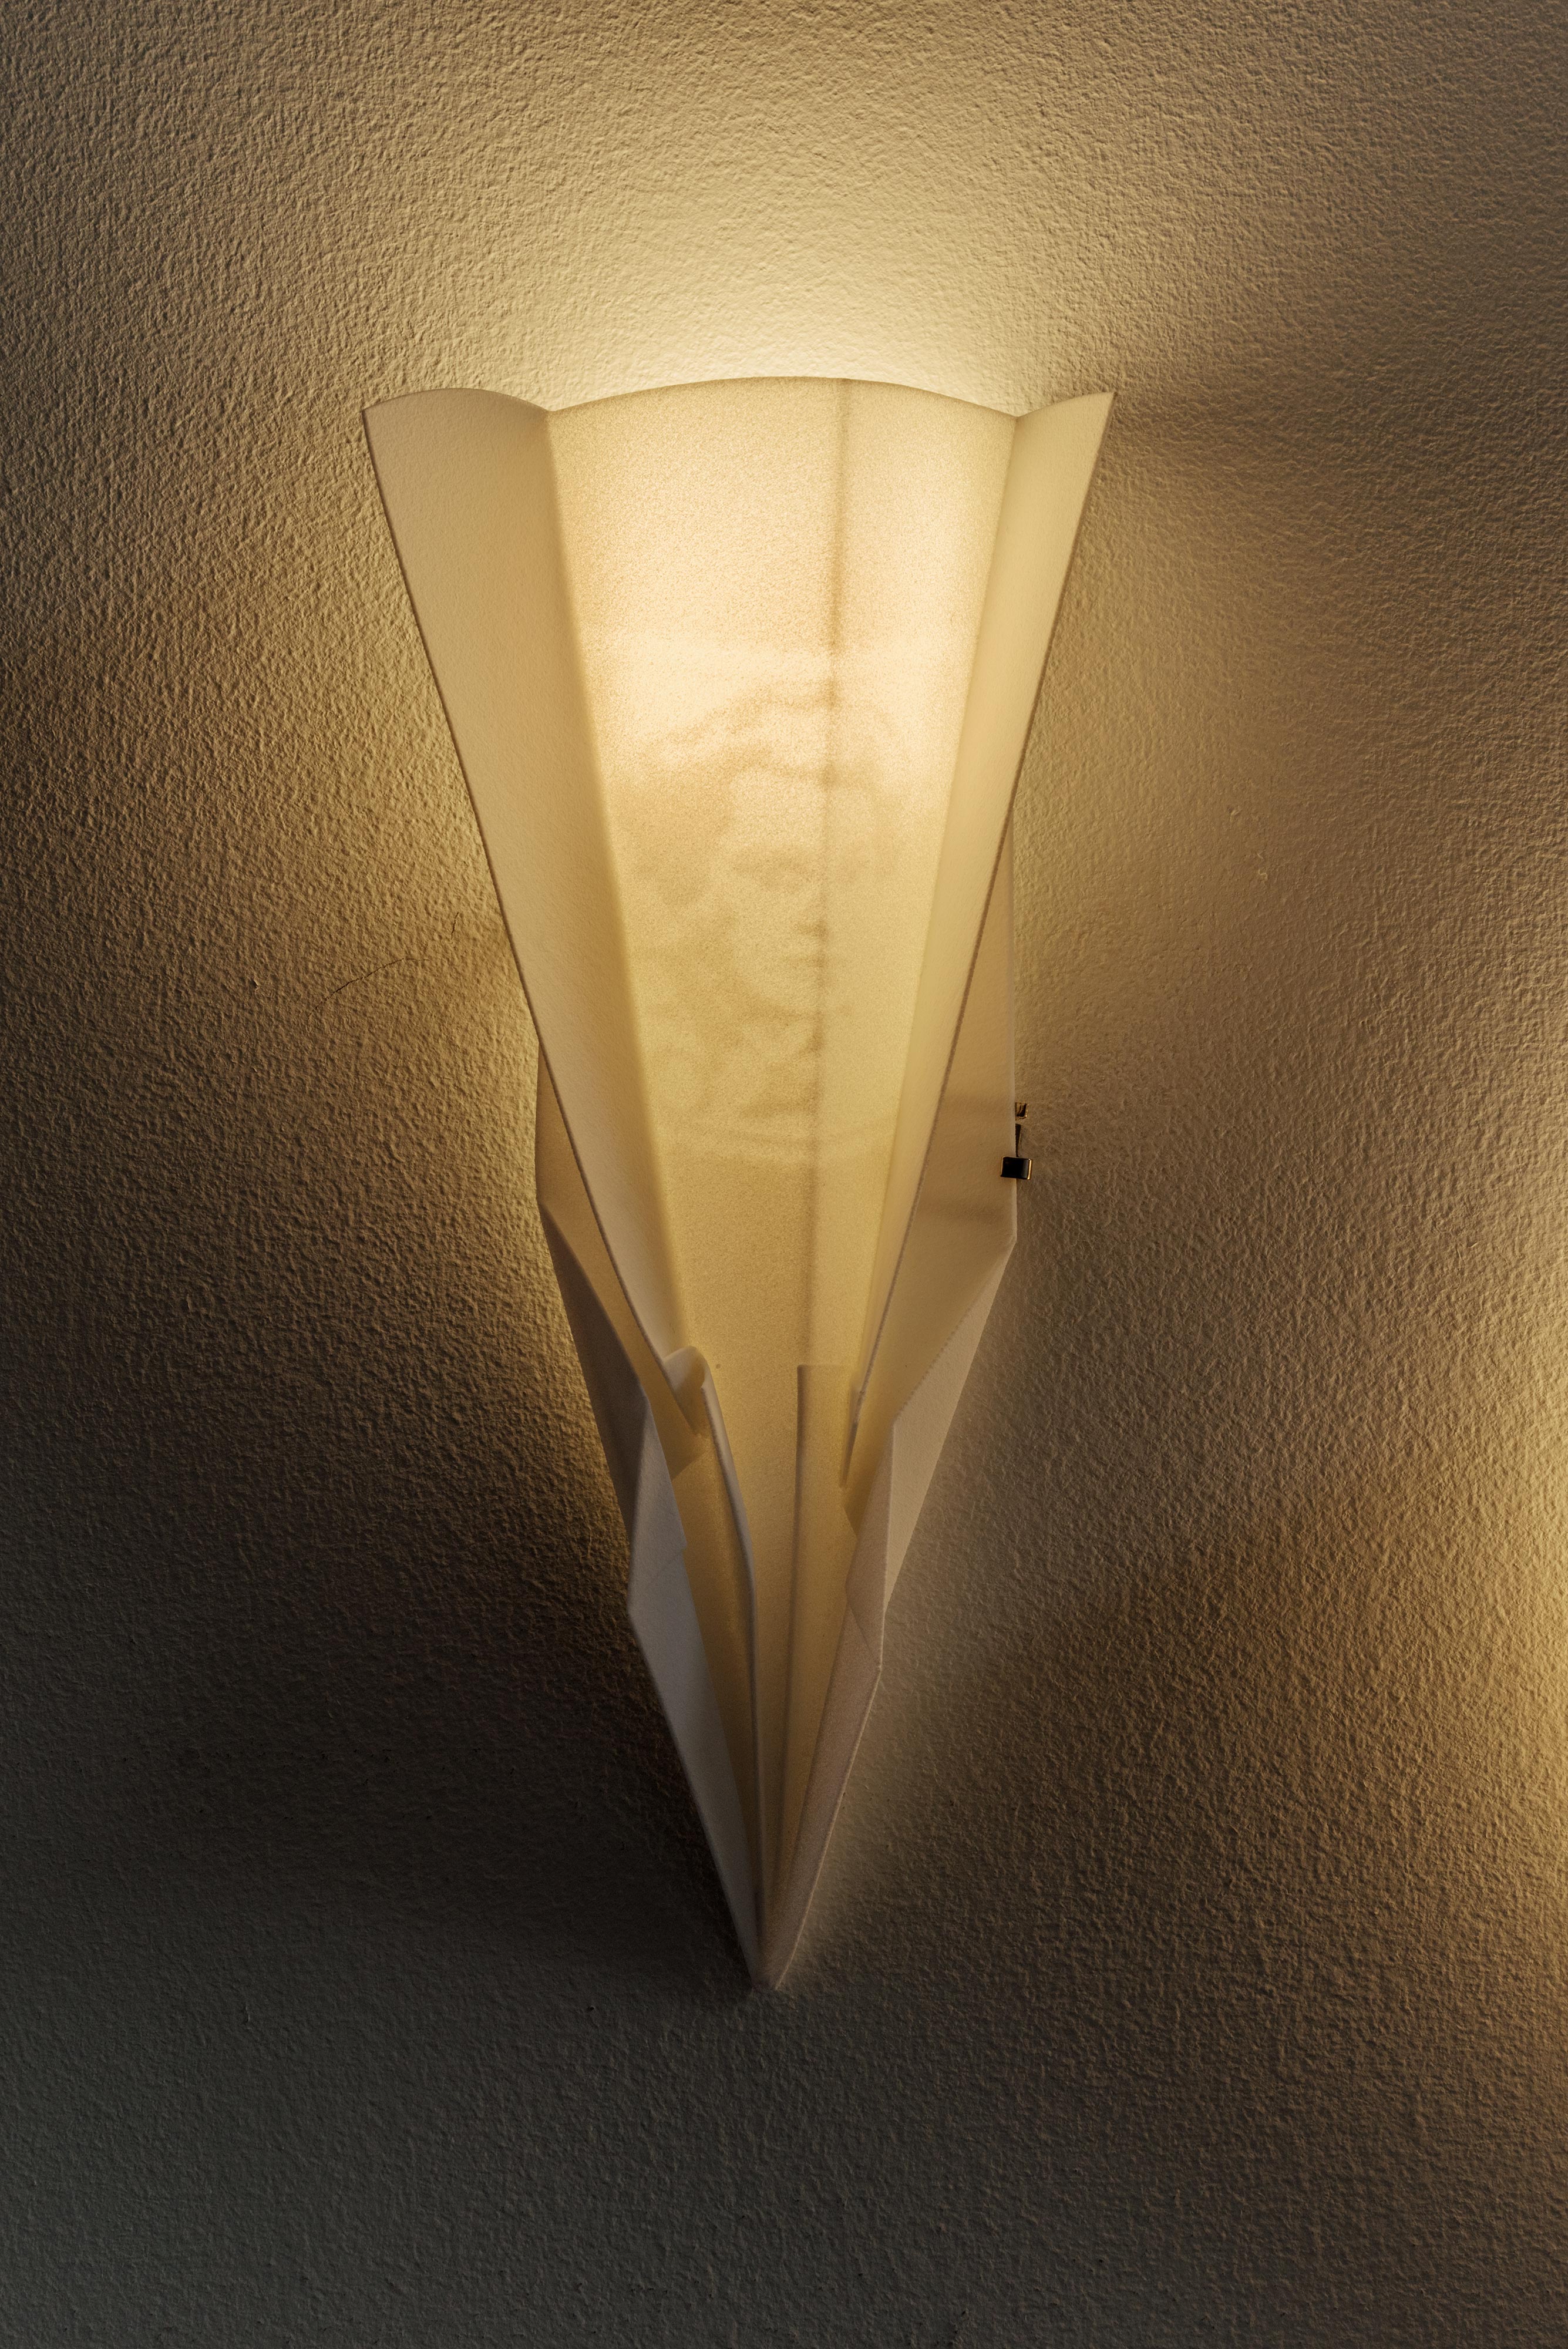 David Muenzer<br>Sconce (The Human Condition)<br>2016<br>Porous nylon, lighting hardware<br>4.093 x 8.974 in (10.4 x 22.8 cm)